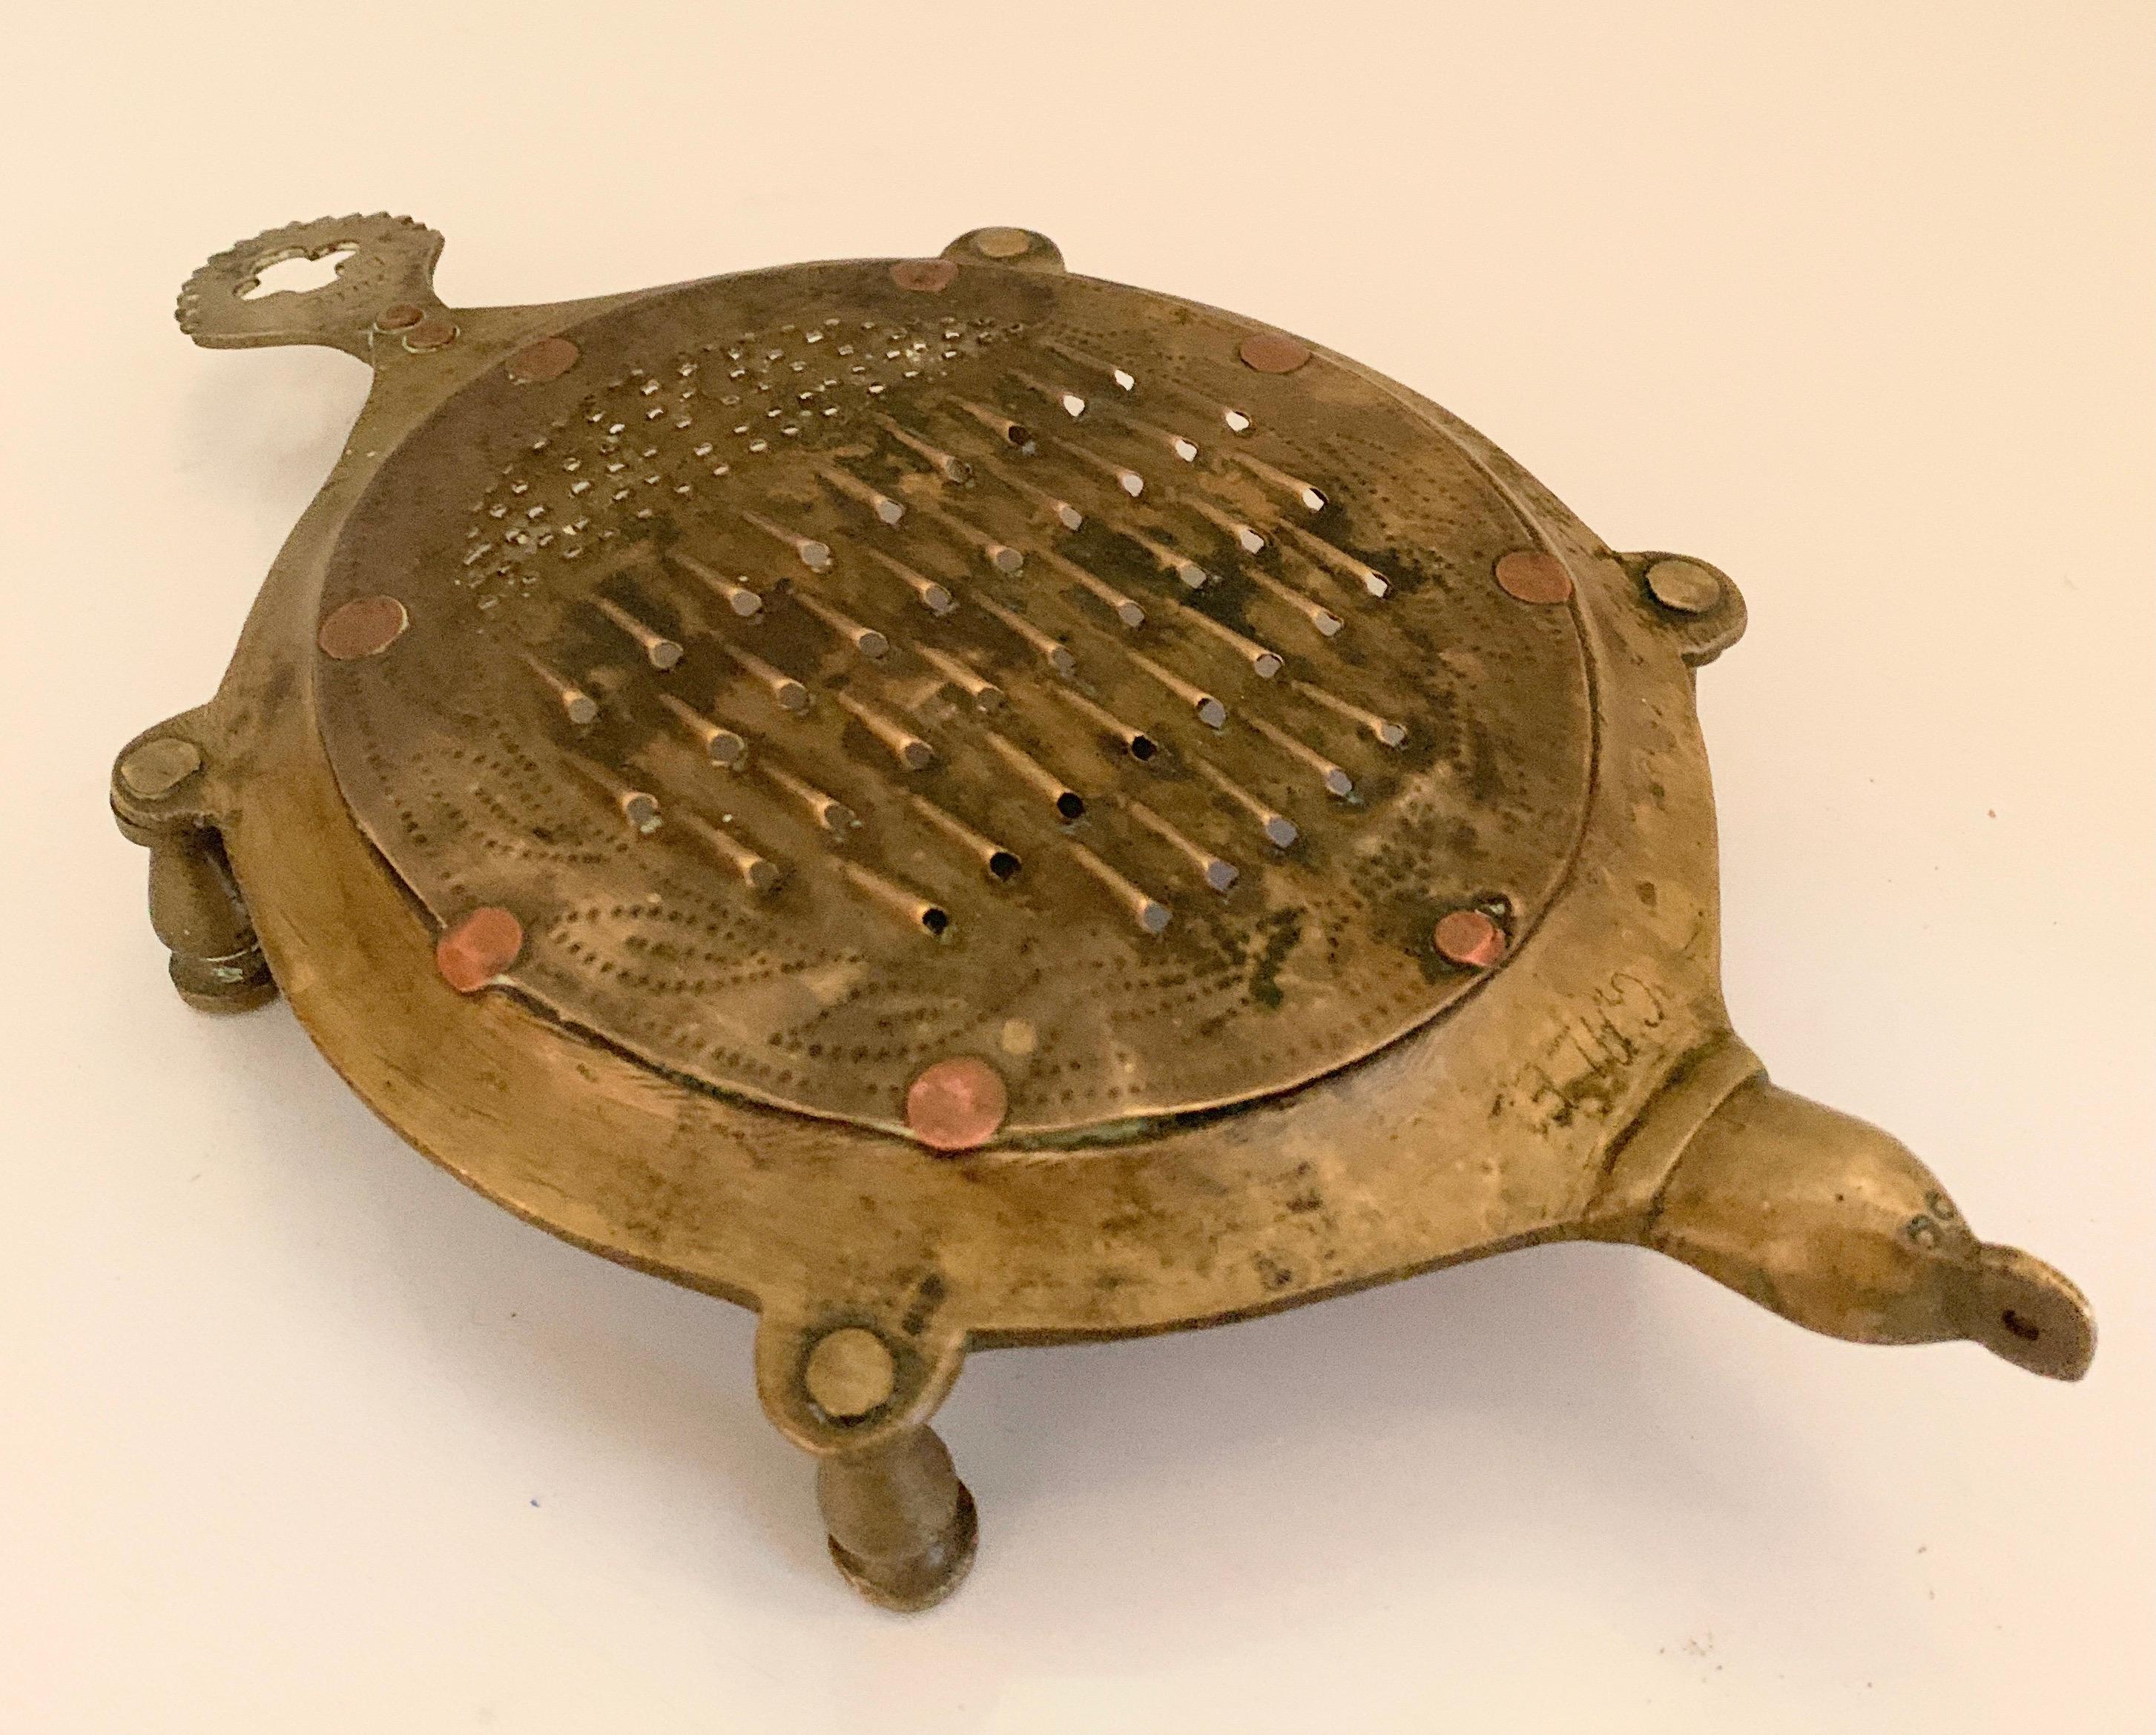 20th Century Andhra Pradesh Brass Vegetable Cheese Coconut Grater in the Shape of a Turtle